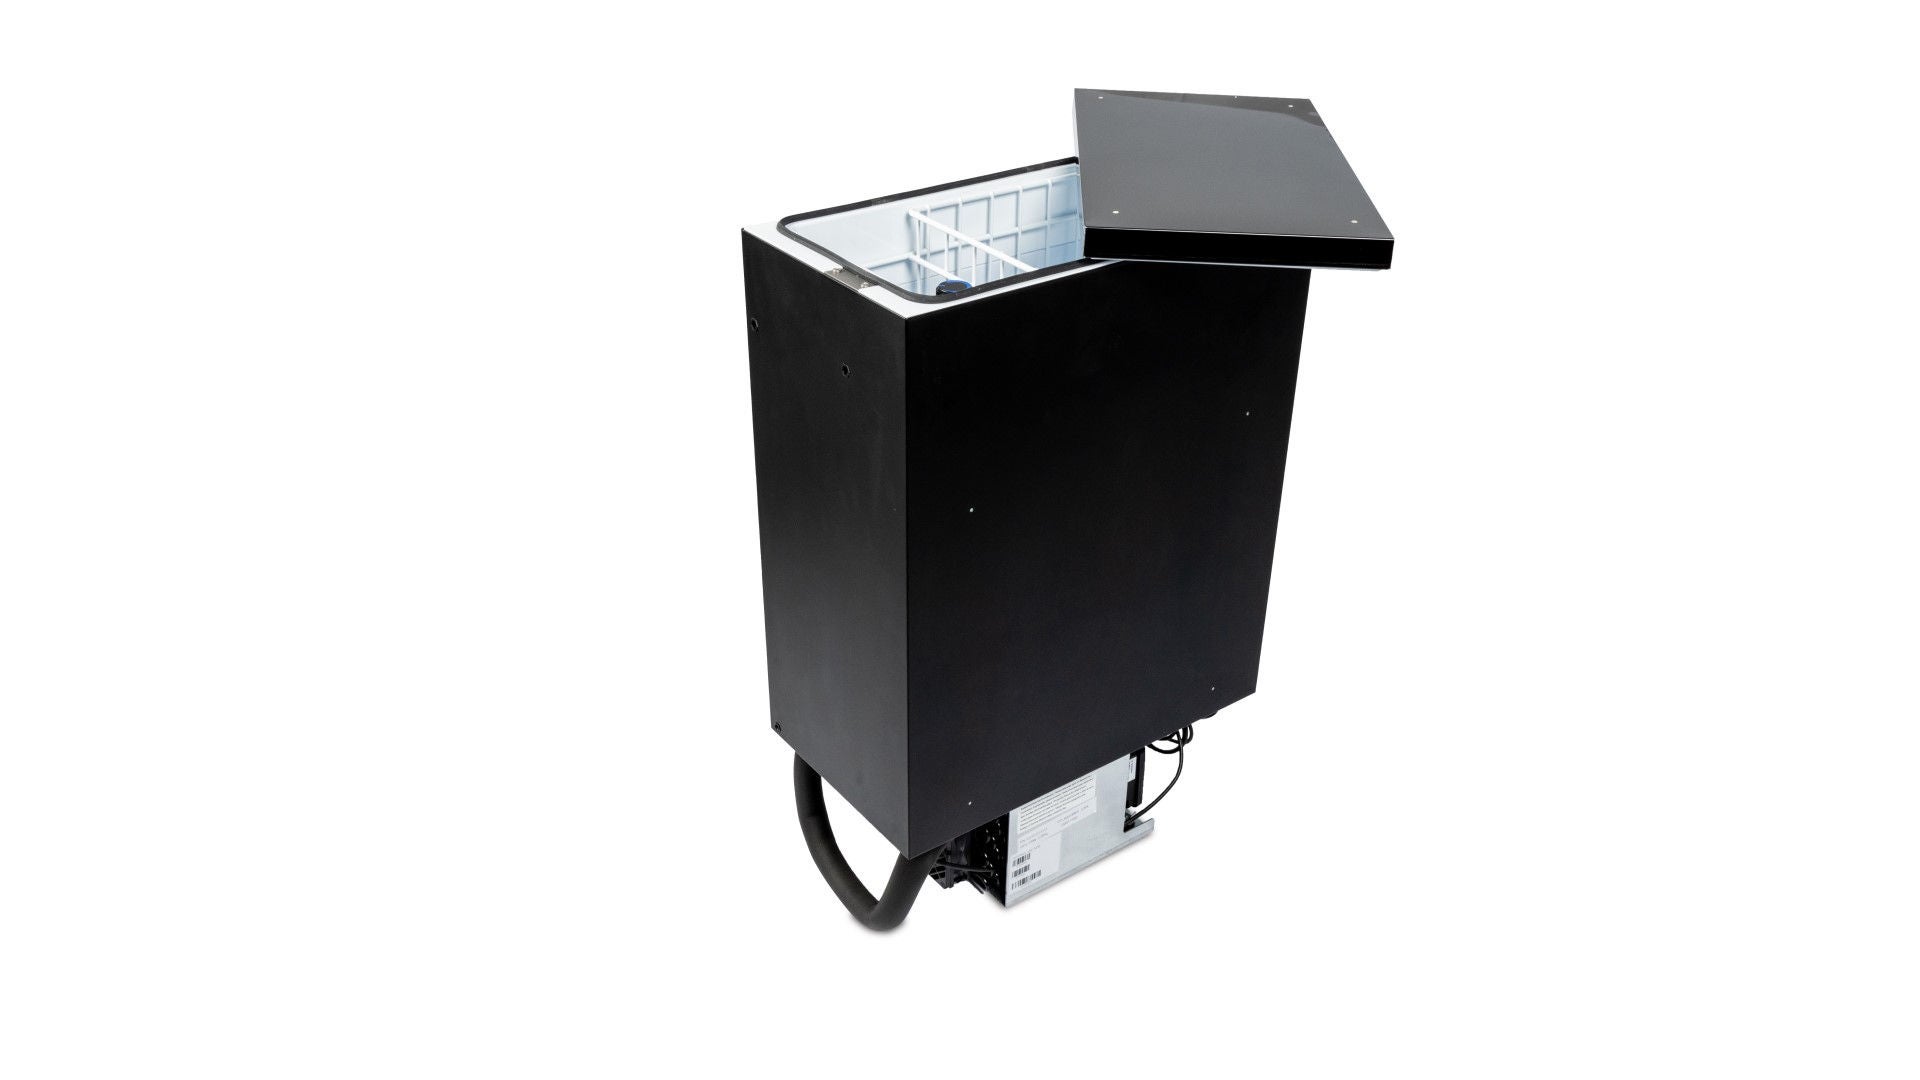 Product picture of BI 36 cooling box semi-open